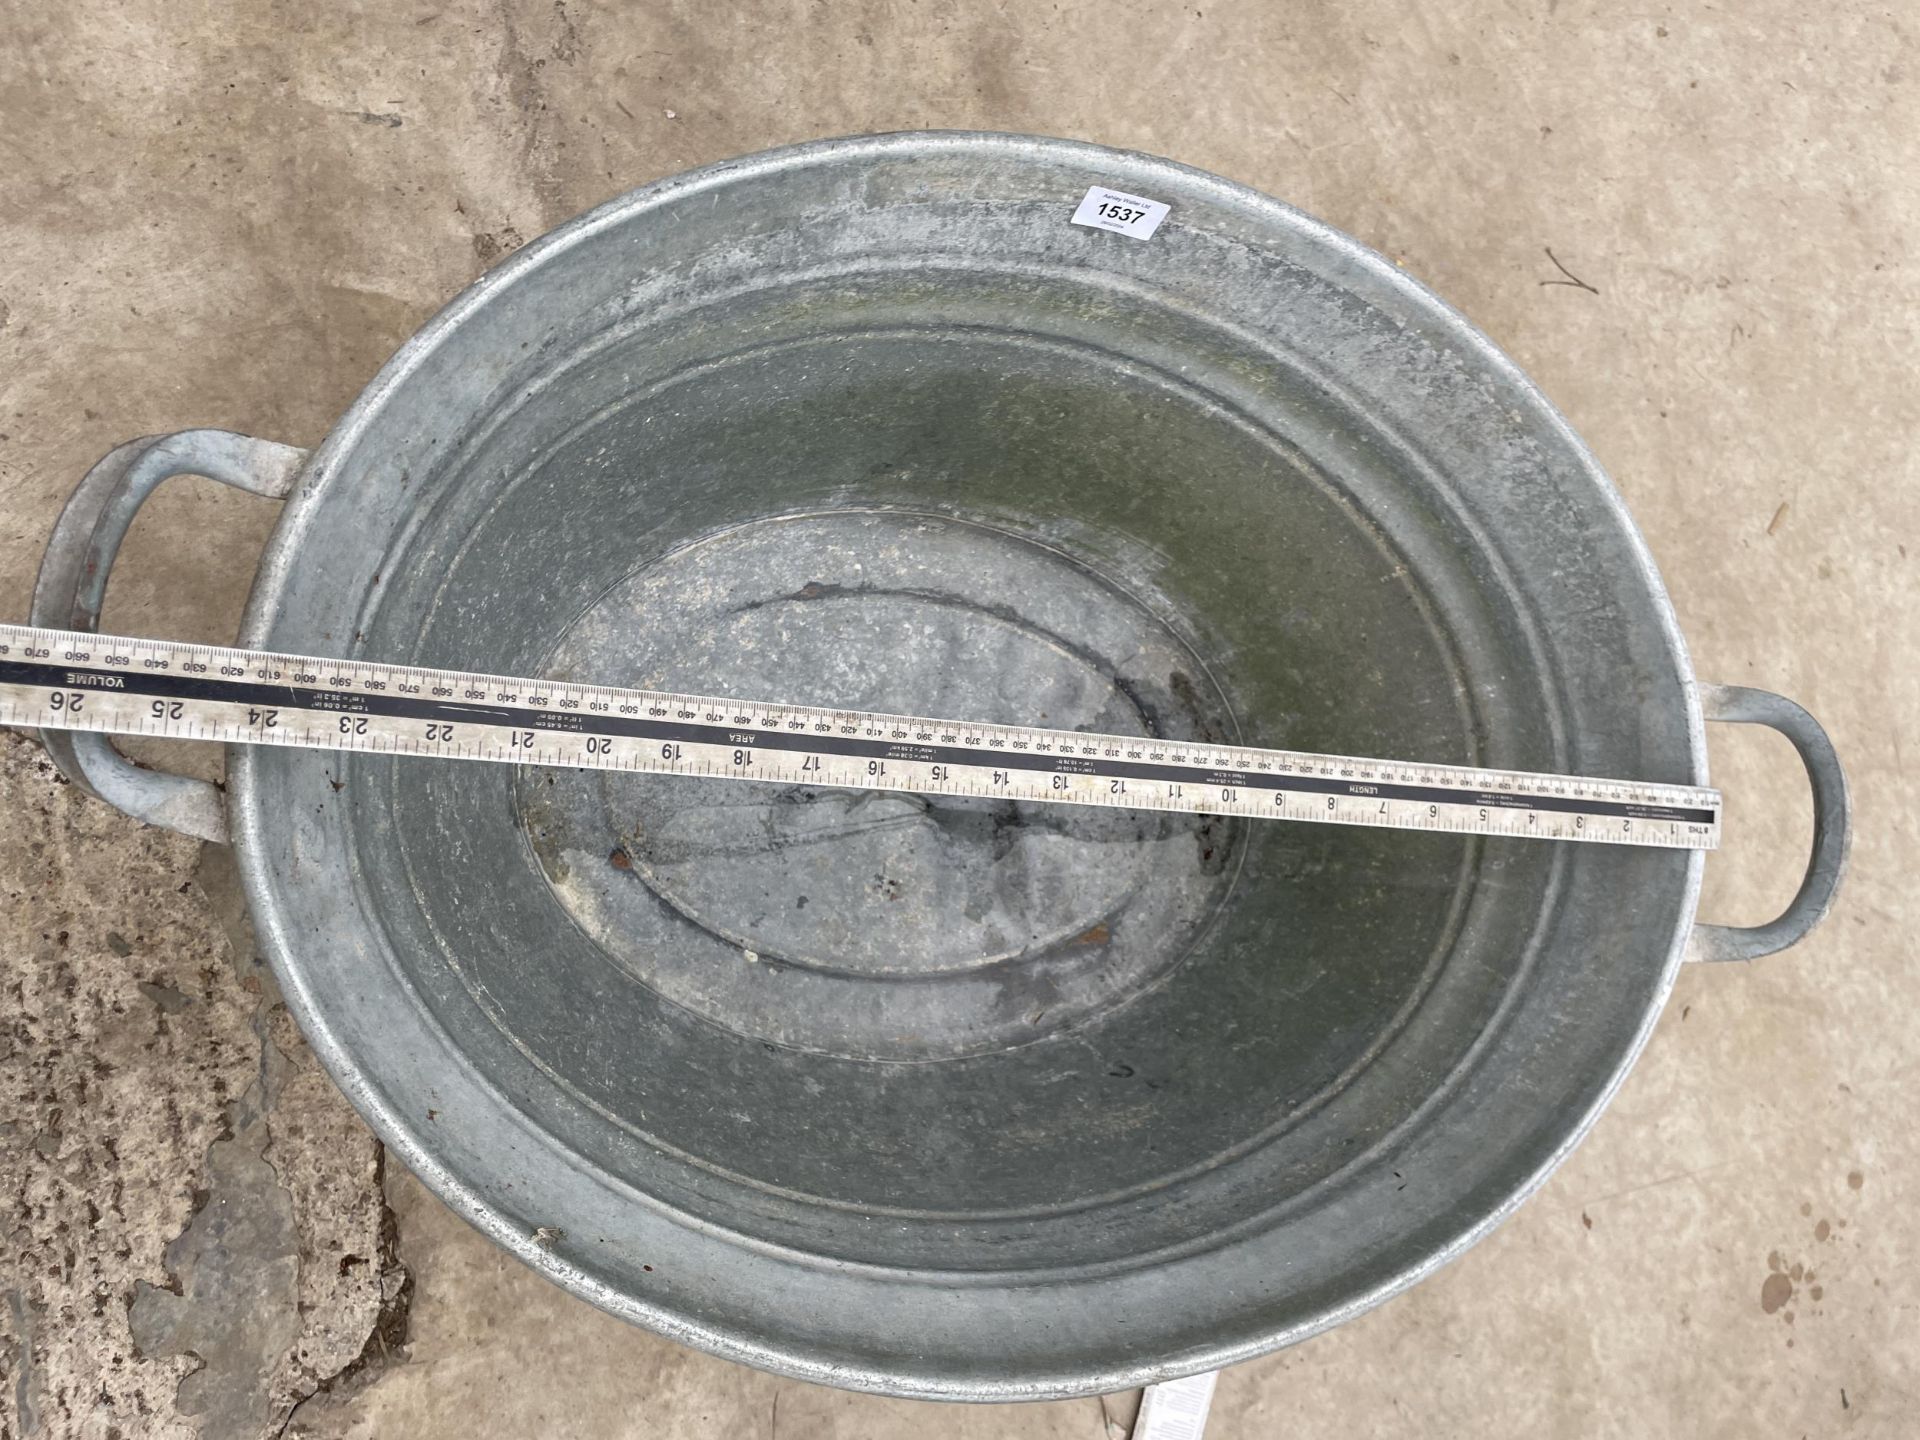 A SMALL OVAL GALVANISED TIN BATH - Image 2 of 2